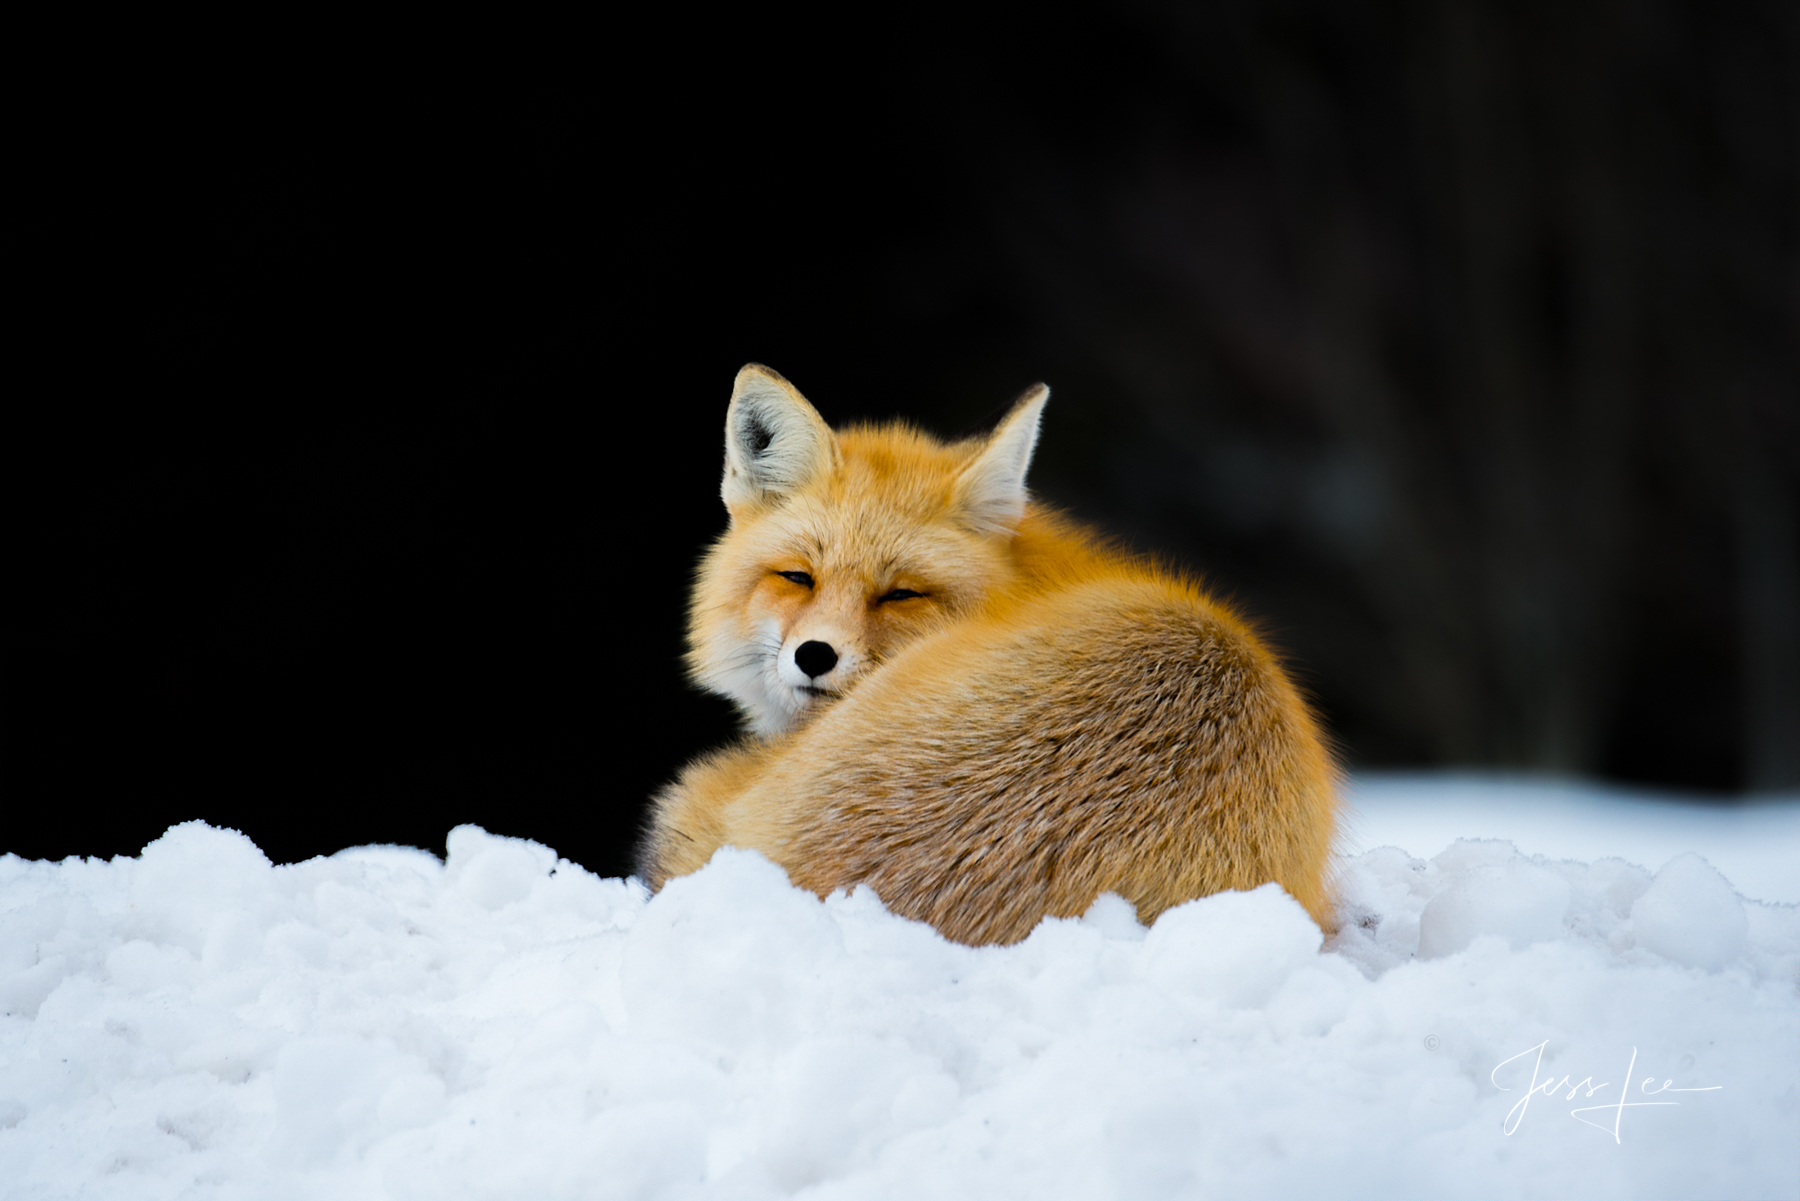 Limited Edition of 250 Exclusive high-resolution Museum Quality Fine Art FOX  Prints. Photos copyright © Jess Lee